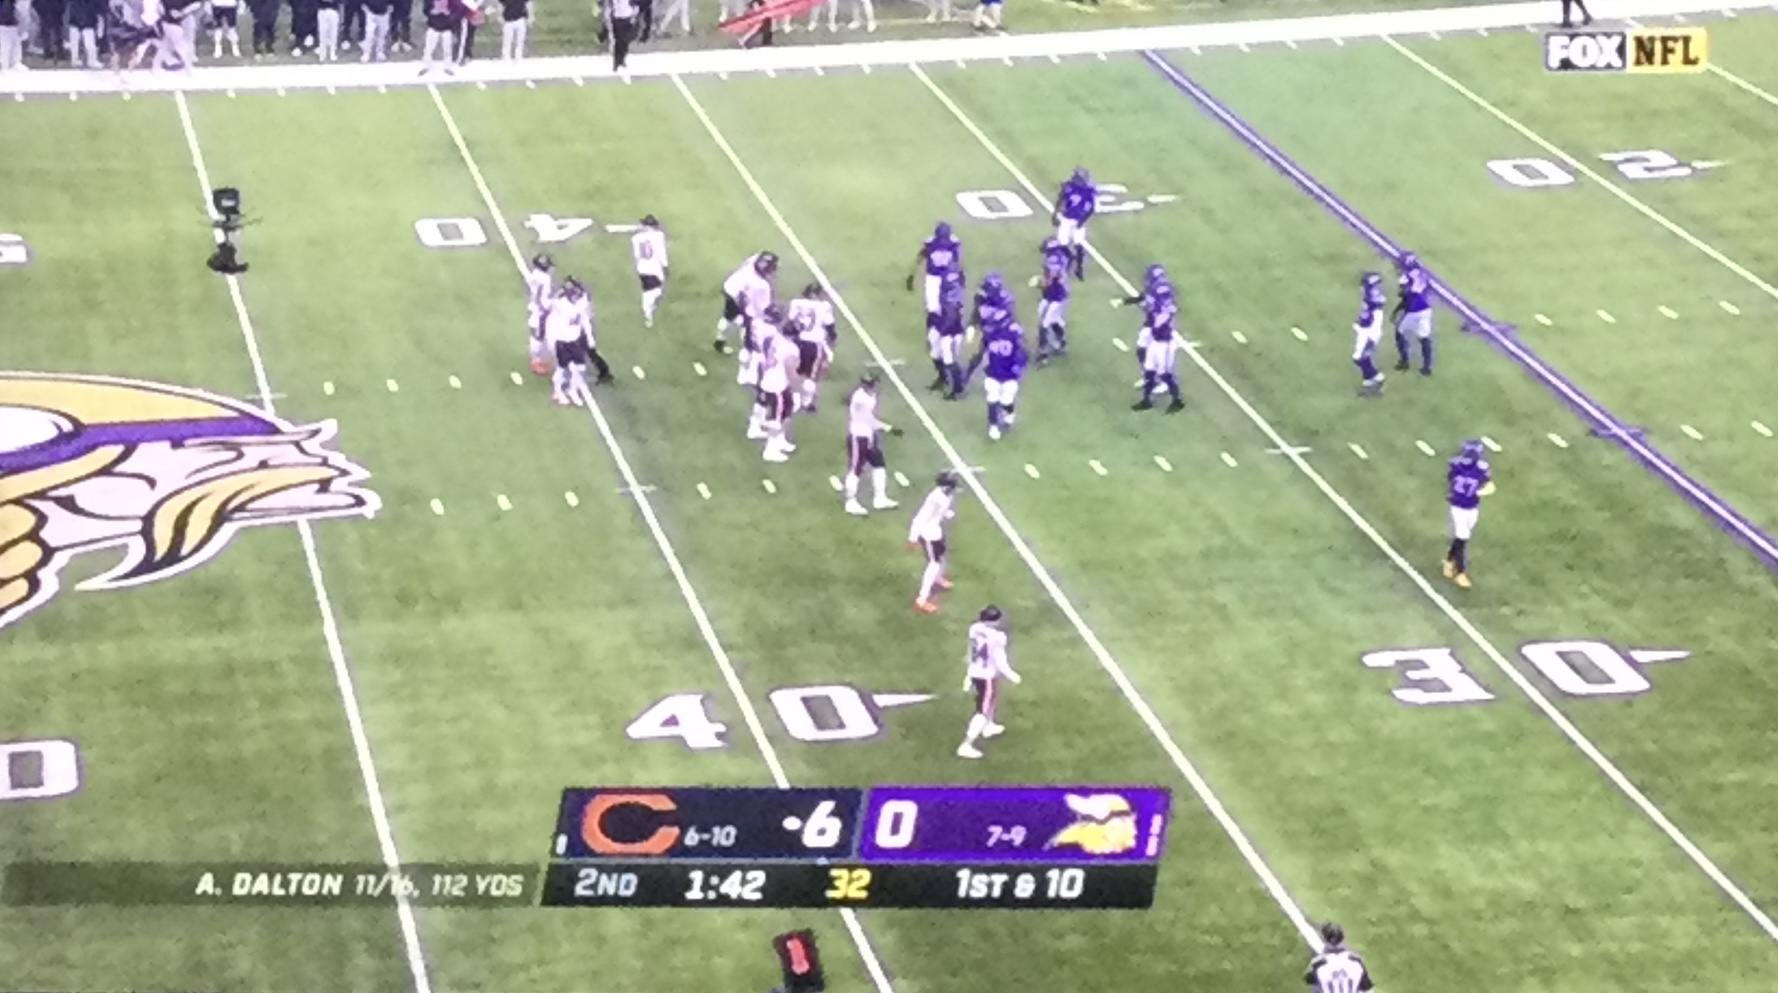 There’s something calming about watching 2 NFL teams with nothing to play for. #Bears #ChicagoBears #FireNagy